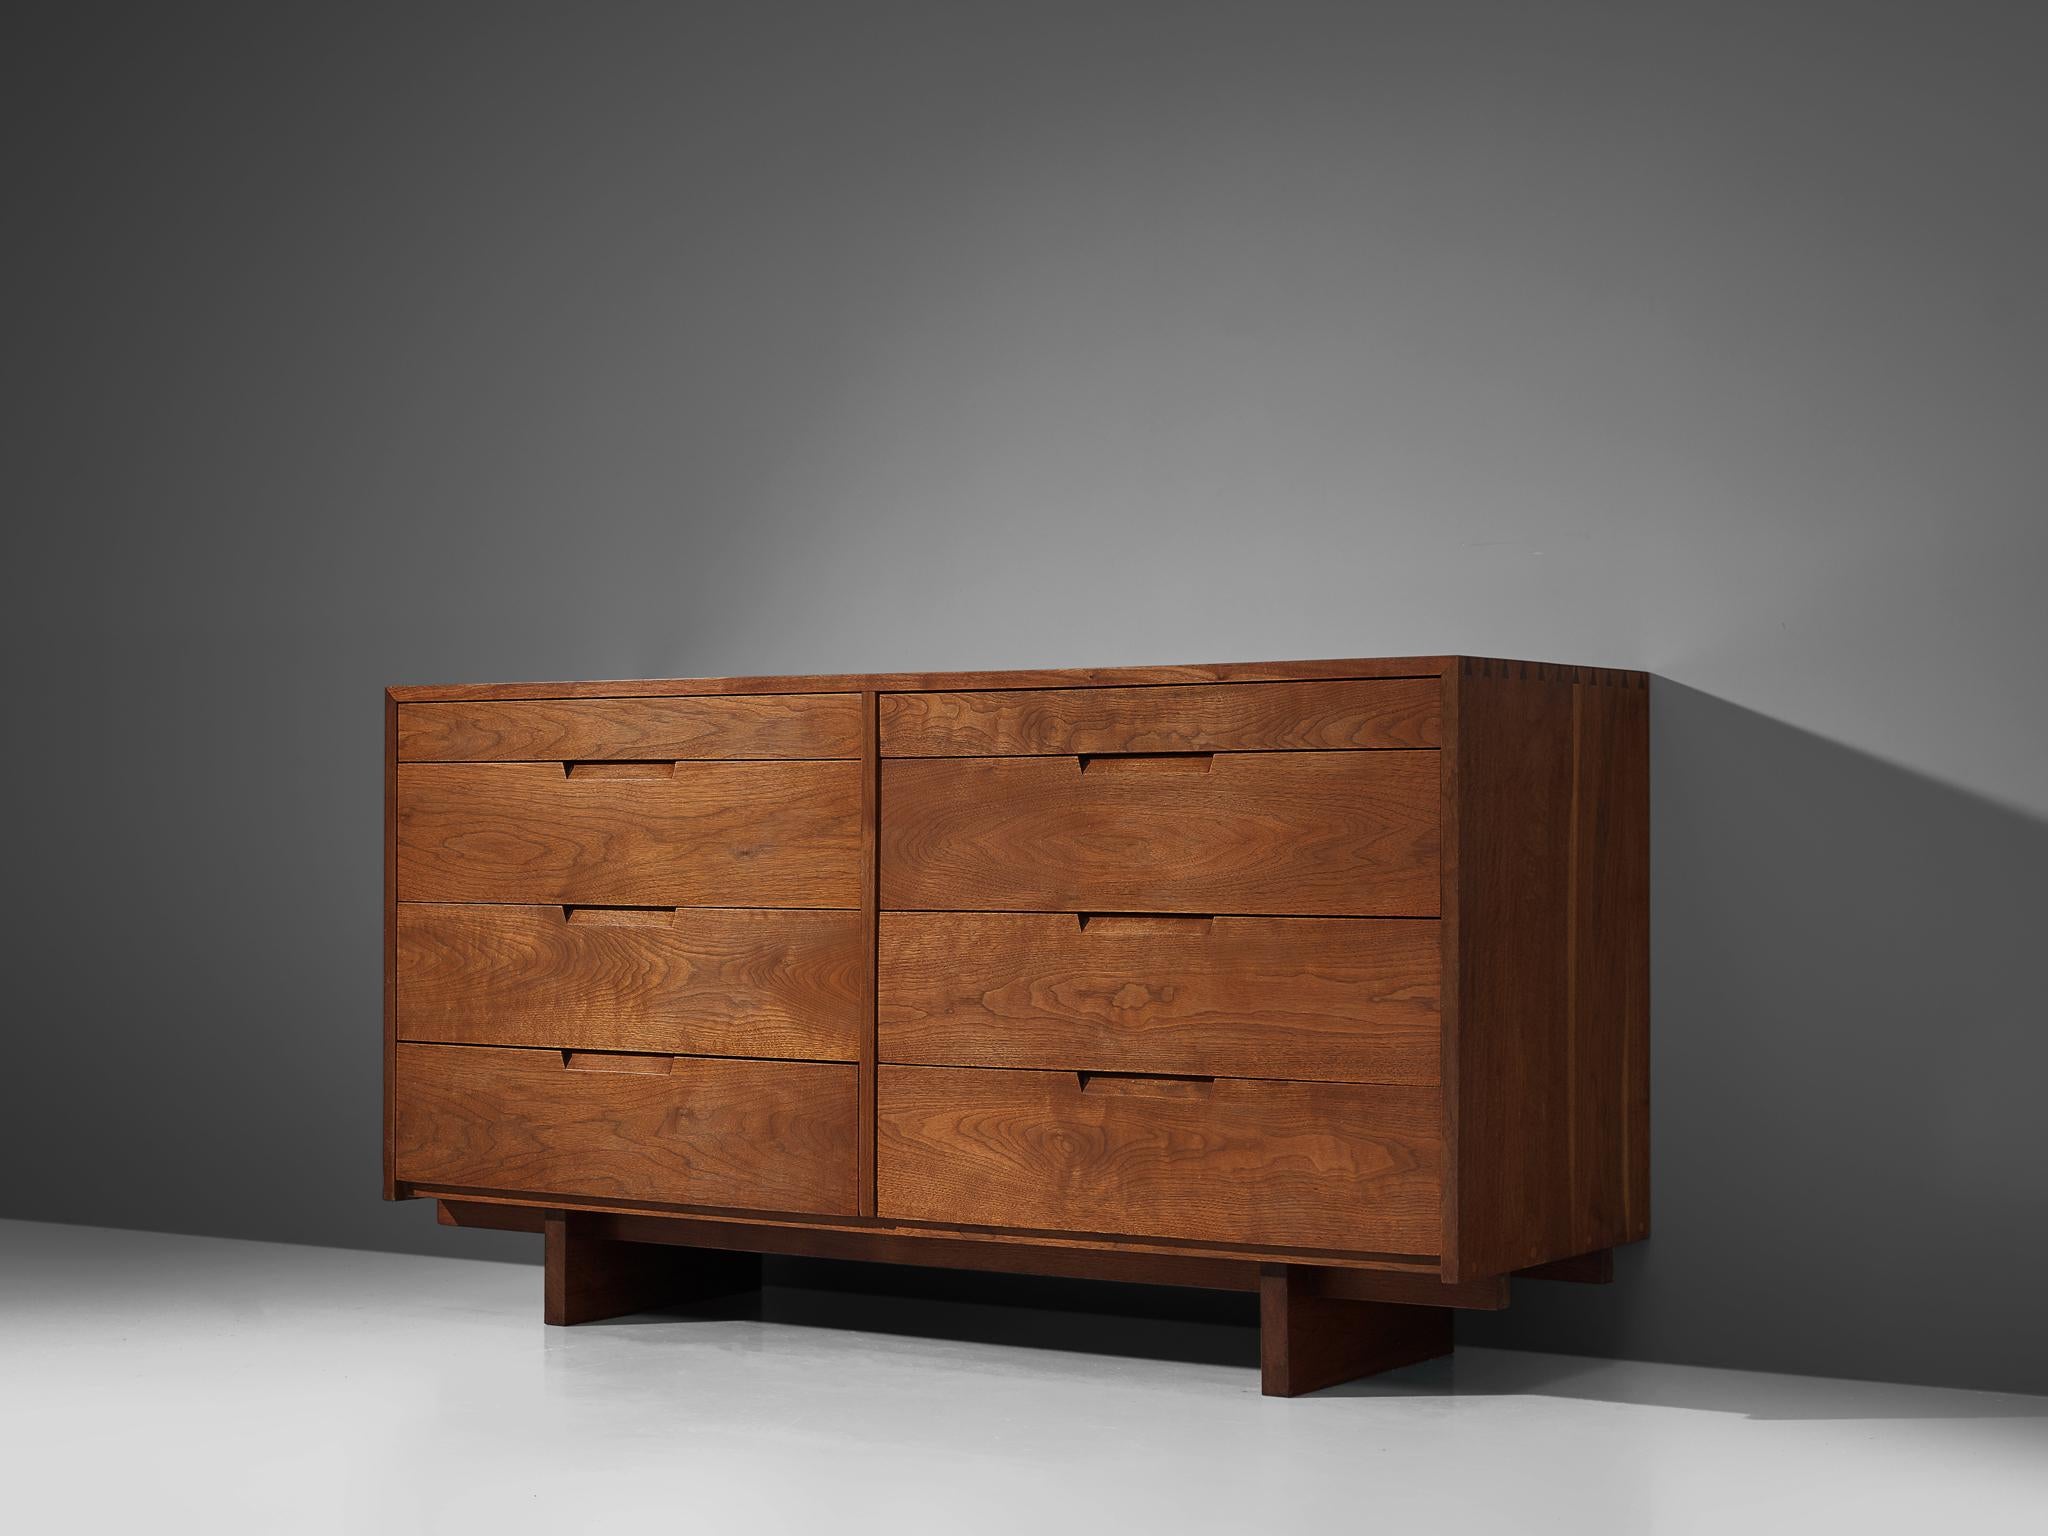 George Nakashima, cabinet in walnut, New Hope, PA, 1955.

These sideboards feature eight drawers, executed in walnut and finished with archetypical dovetail Nakashima wood-joints. The cabinets rest on two slabs of solid walnut that are placed on